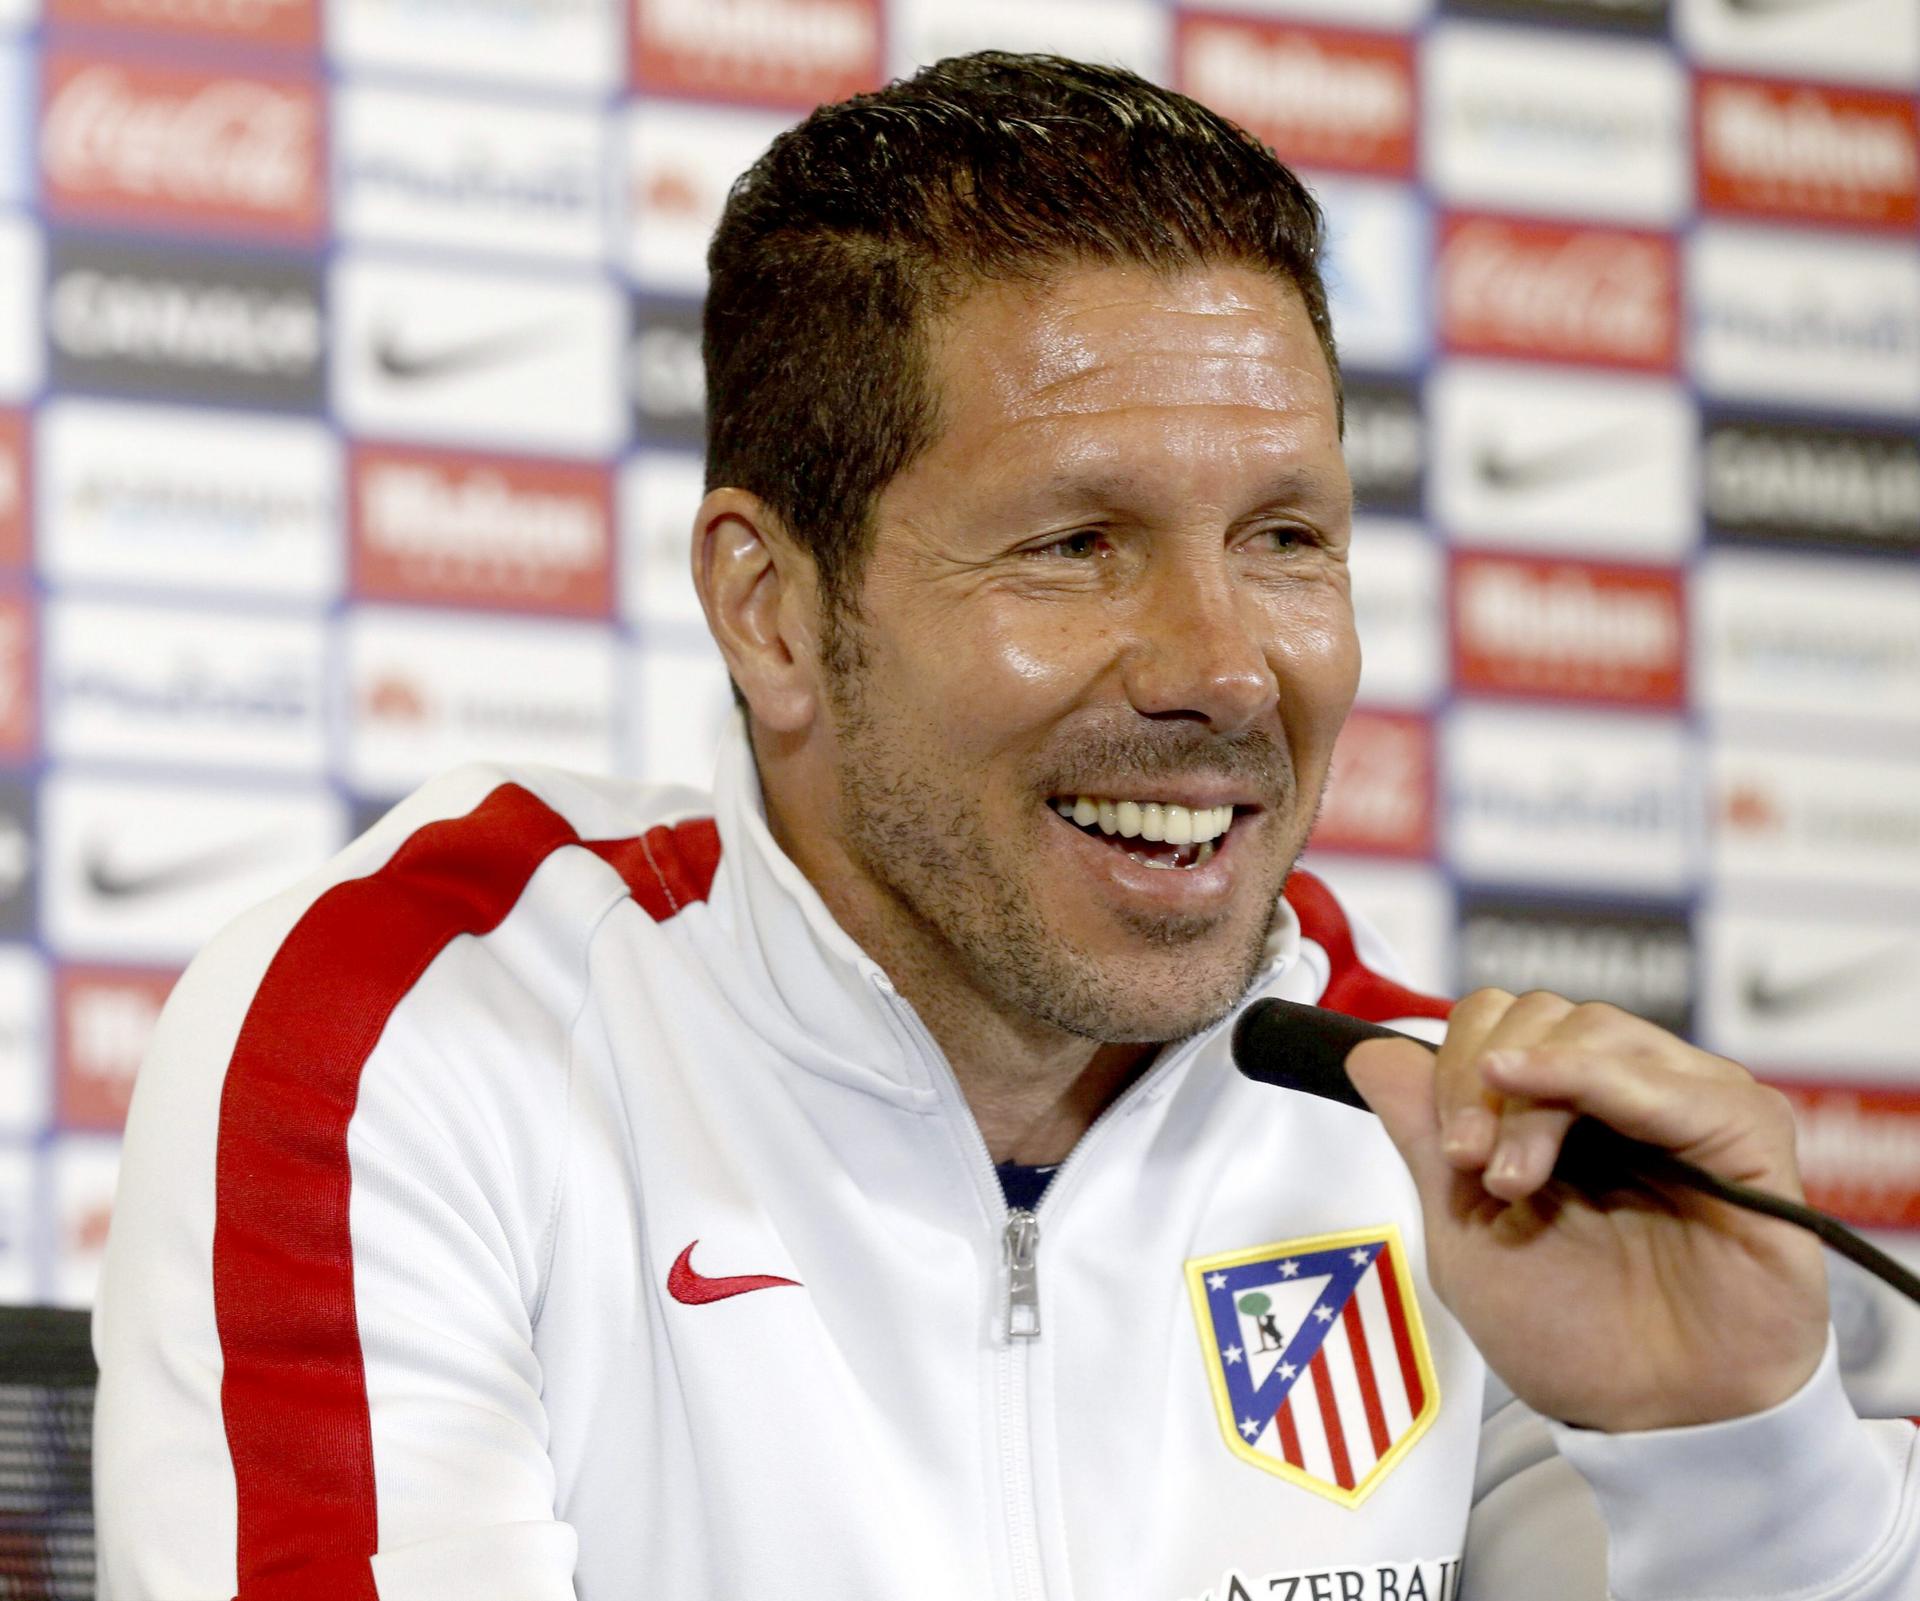 Atletico boss Diego Simeone is the driving force behind their success, says Fernando Torres. Photo: EPA